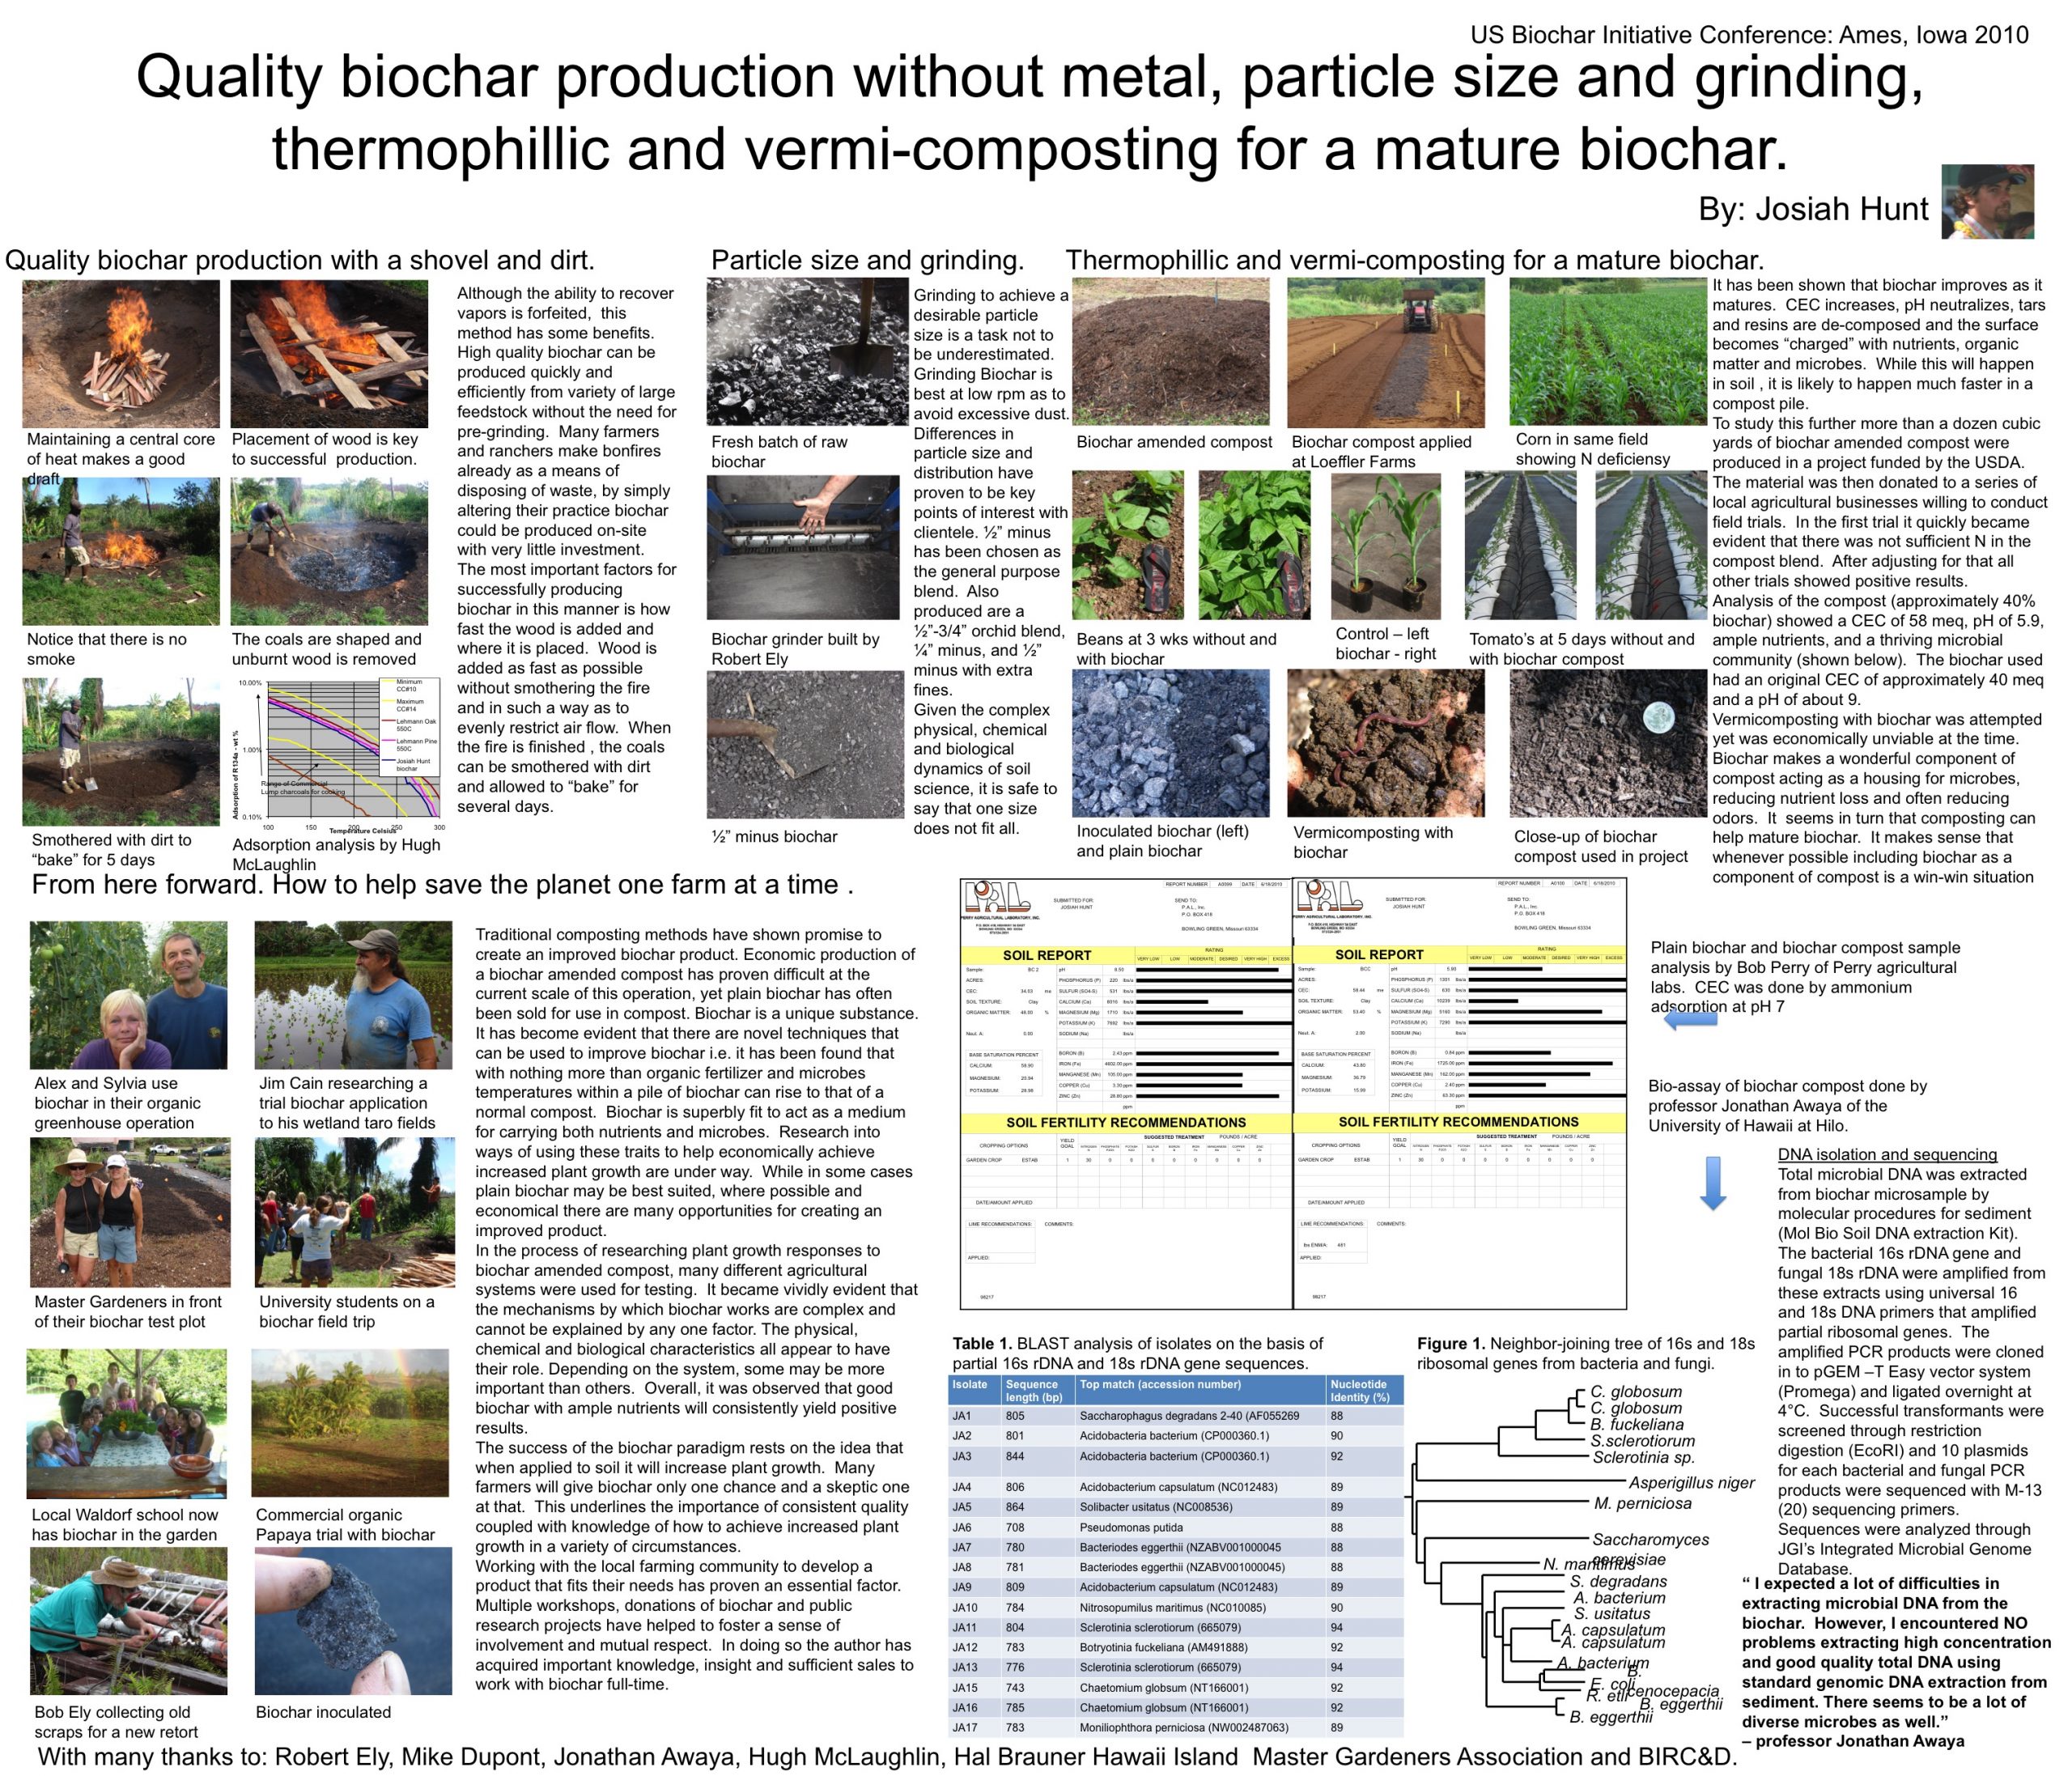 Poster from US Biochar Initiative Conference, Ames Iowa 2010